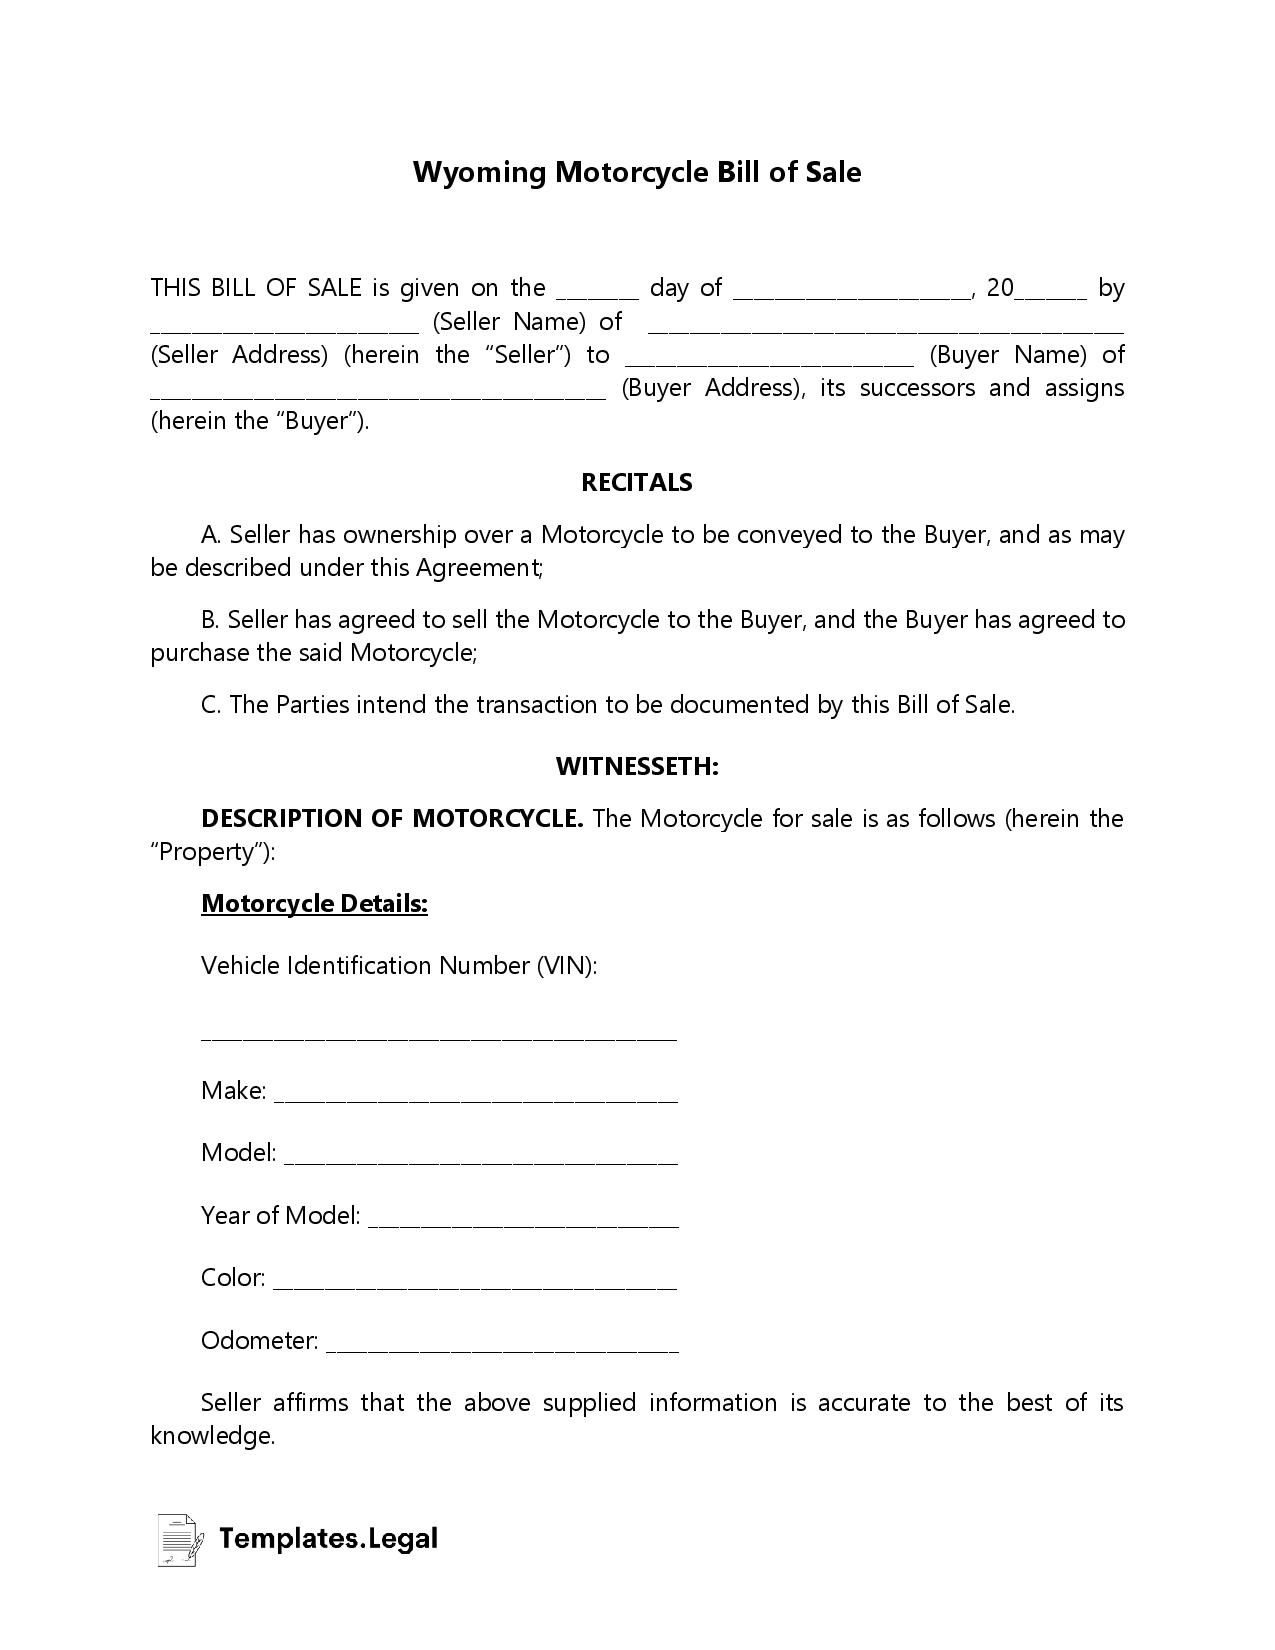 Wyoming Motorcycle Bill of Sale - Templates.Legal